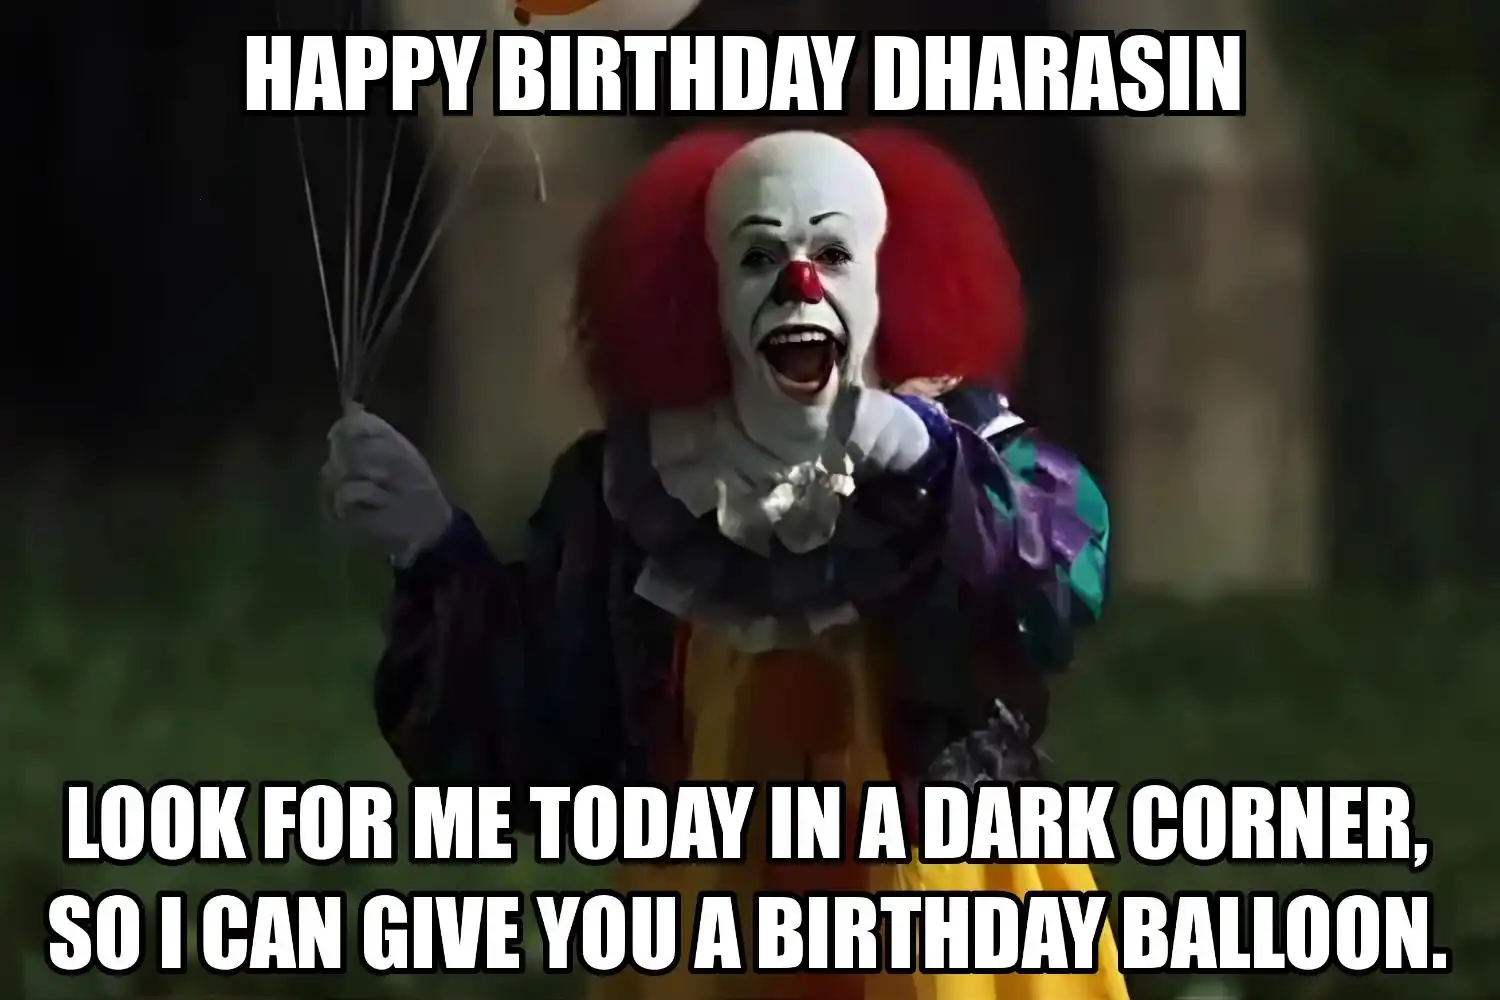 Happy Birthday Dharasin I Can Give You A Balloon Meme